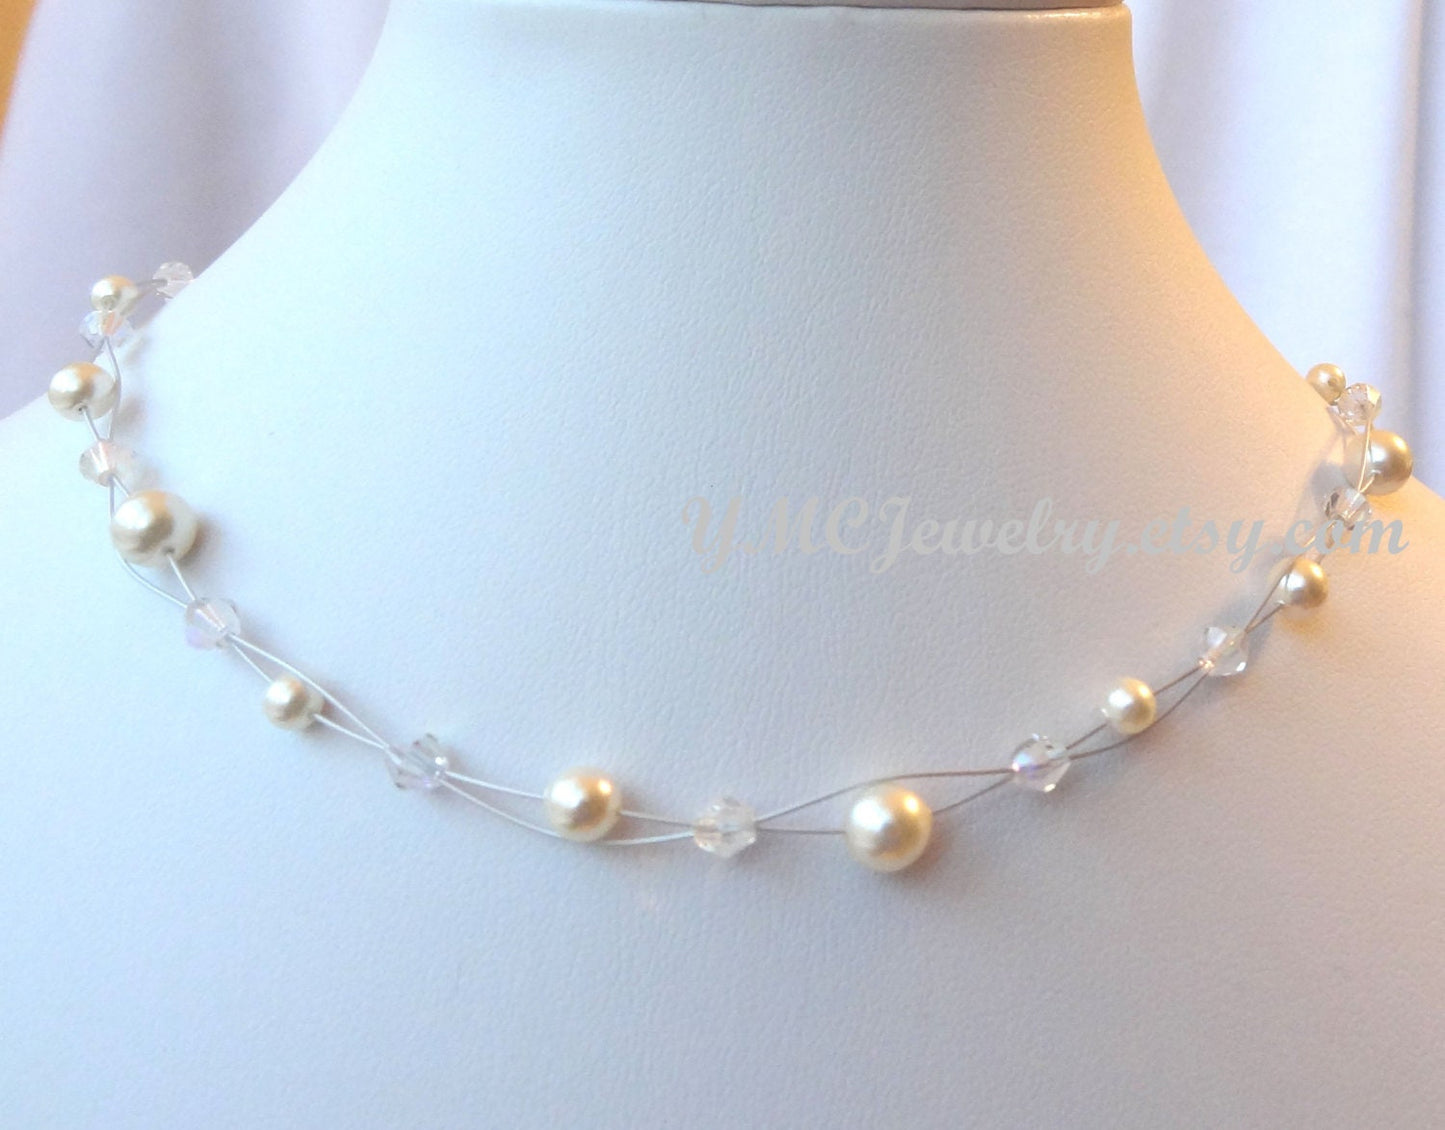 Double Strand PRESTIGE Crystal Pearl Children Necklace,Flower Girl Pearl Necklace,Junior Bridesmaid Pearl Necklace,Flower Girl Jewelry Set